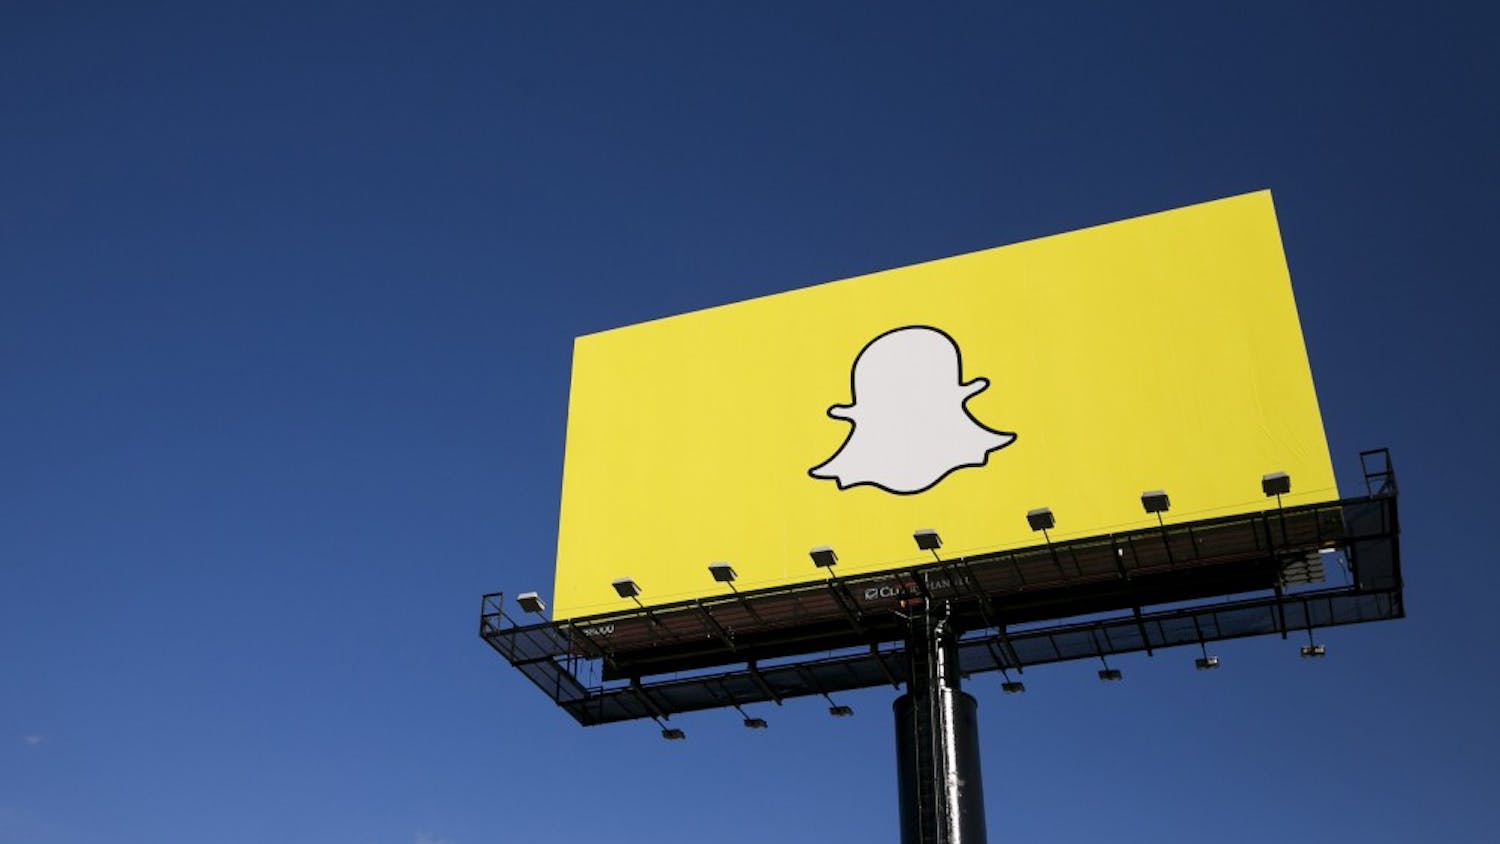 Snapchat's explanation for its mysterious billboards is as vague as the ads: "Fun and awareness." Above, one of its billboards in Richfield, Minn., in October. (Kristoffer Tripplaar/Sipa USA/TNS)